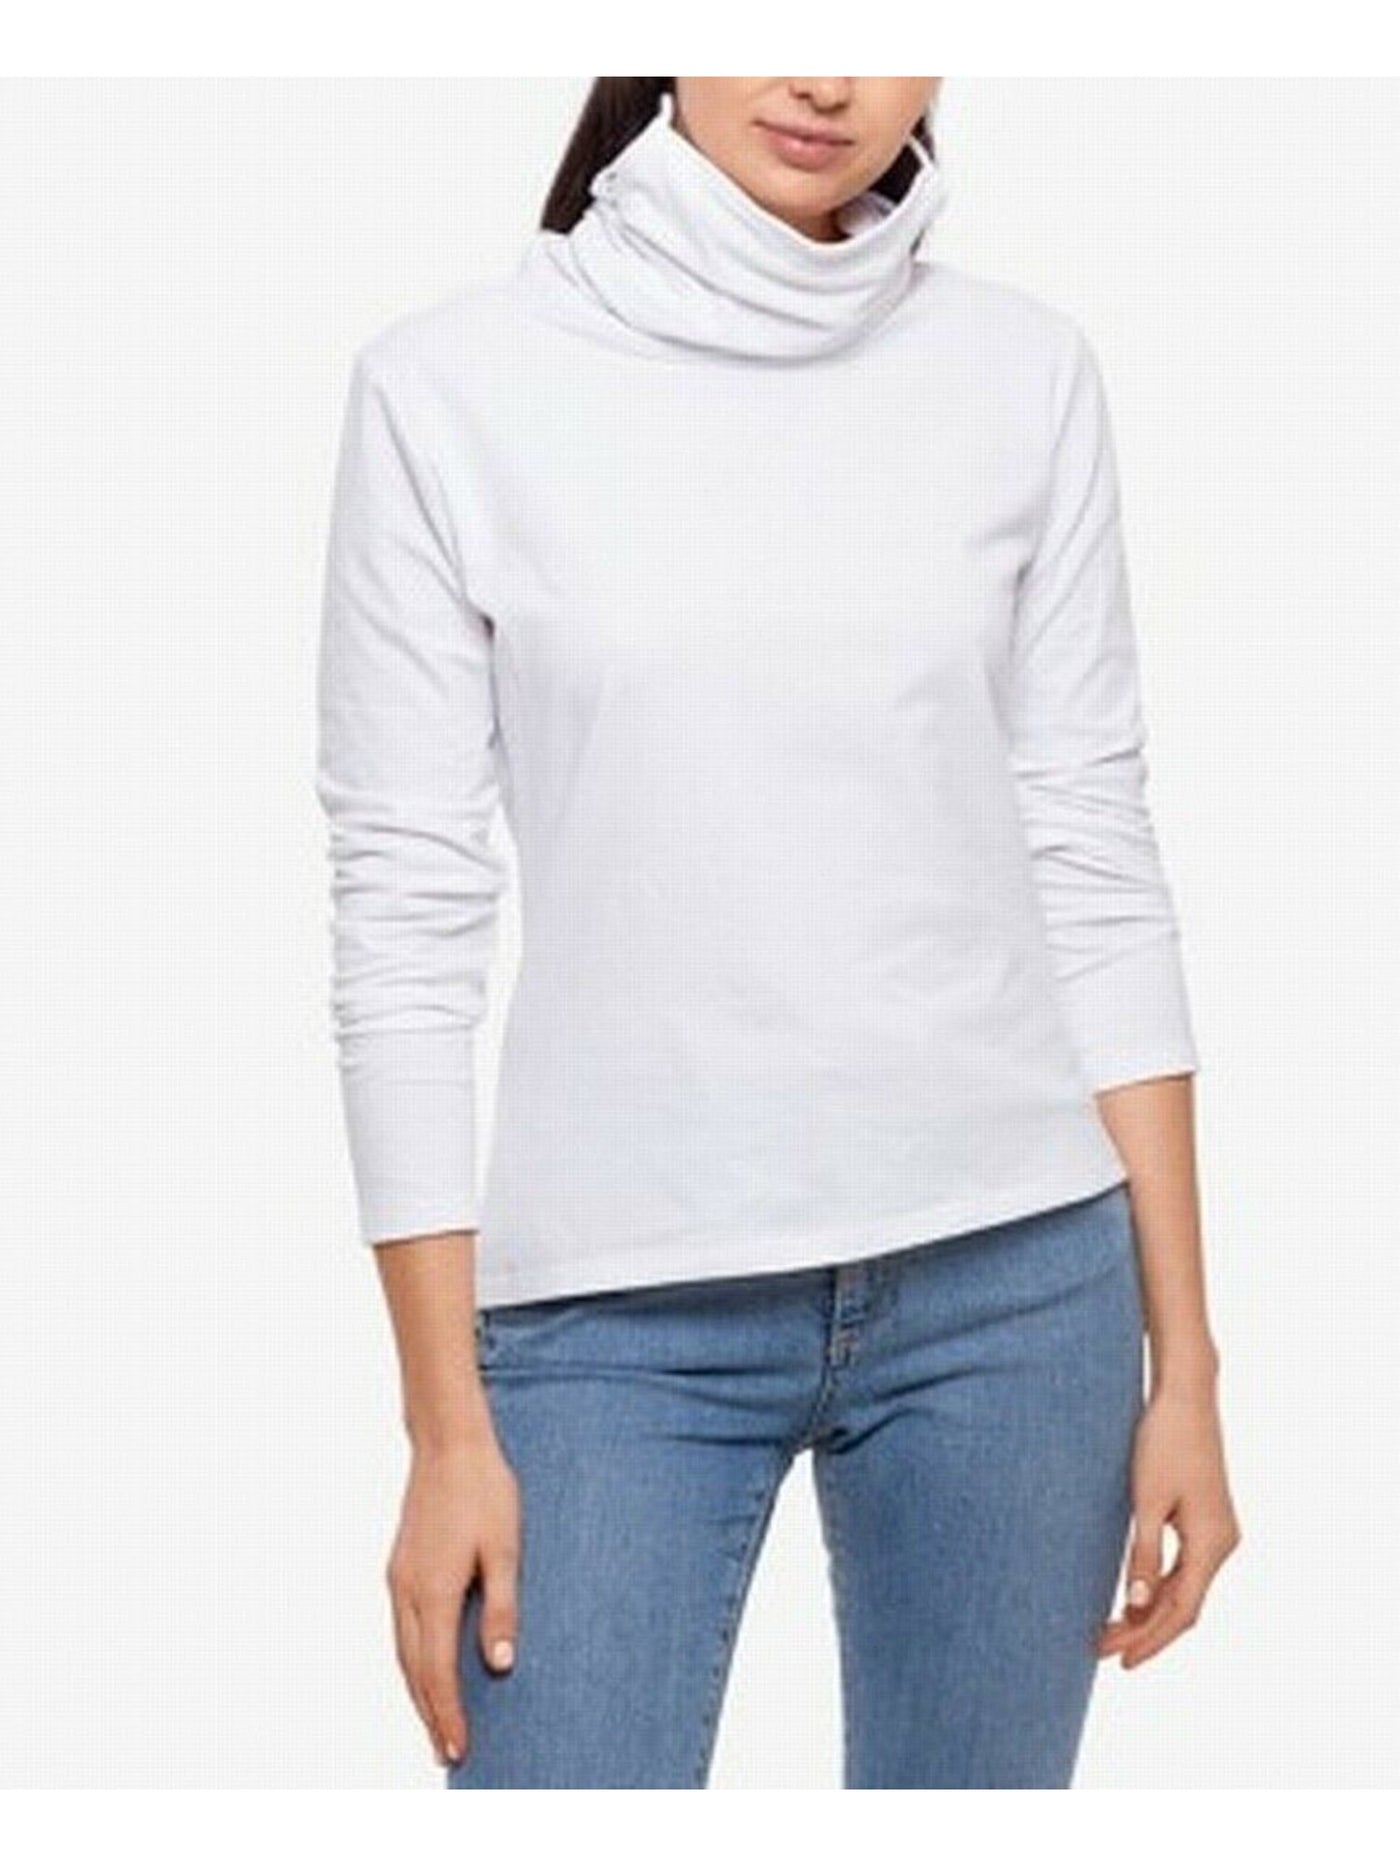 BAM BY BETSY & ADAM Womens White Cotton Blend Long Sleeve Turtle Neck Top S